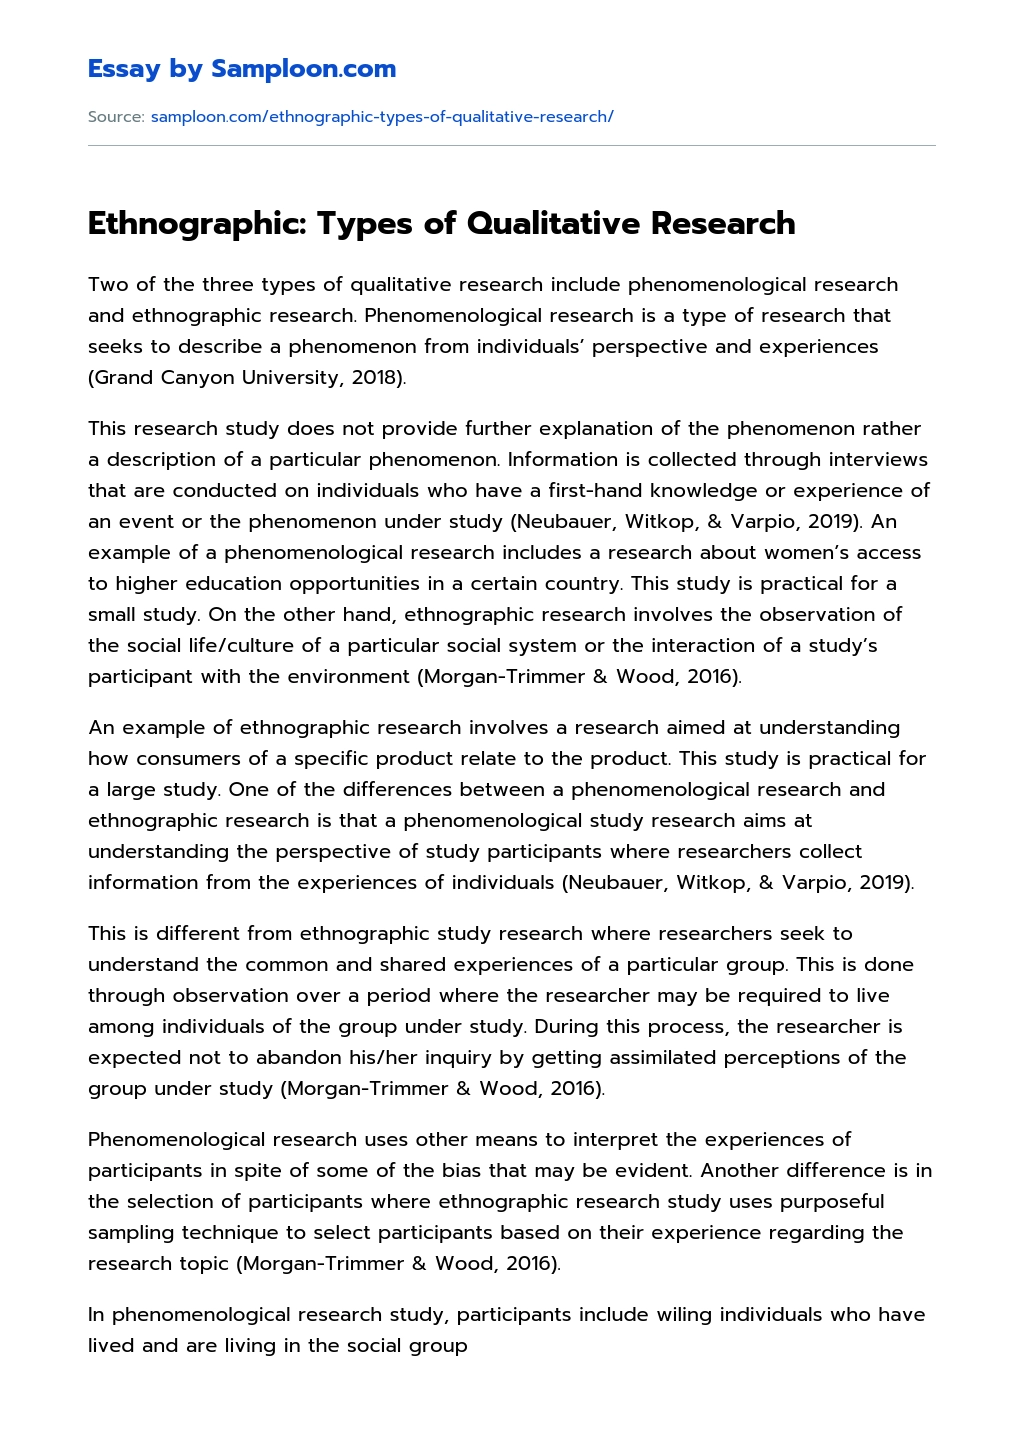 Ethnographic: Types of Qualitative Research Analytical Essay essay